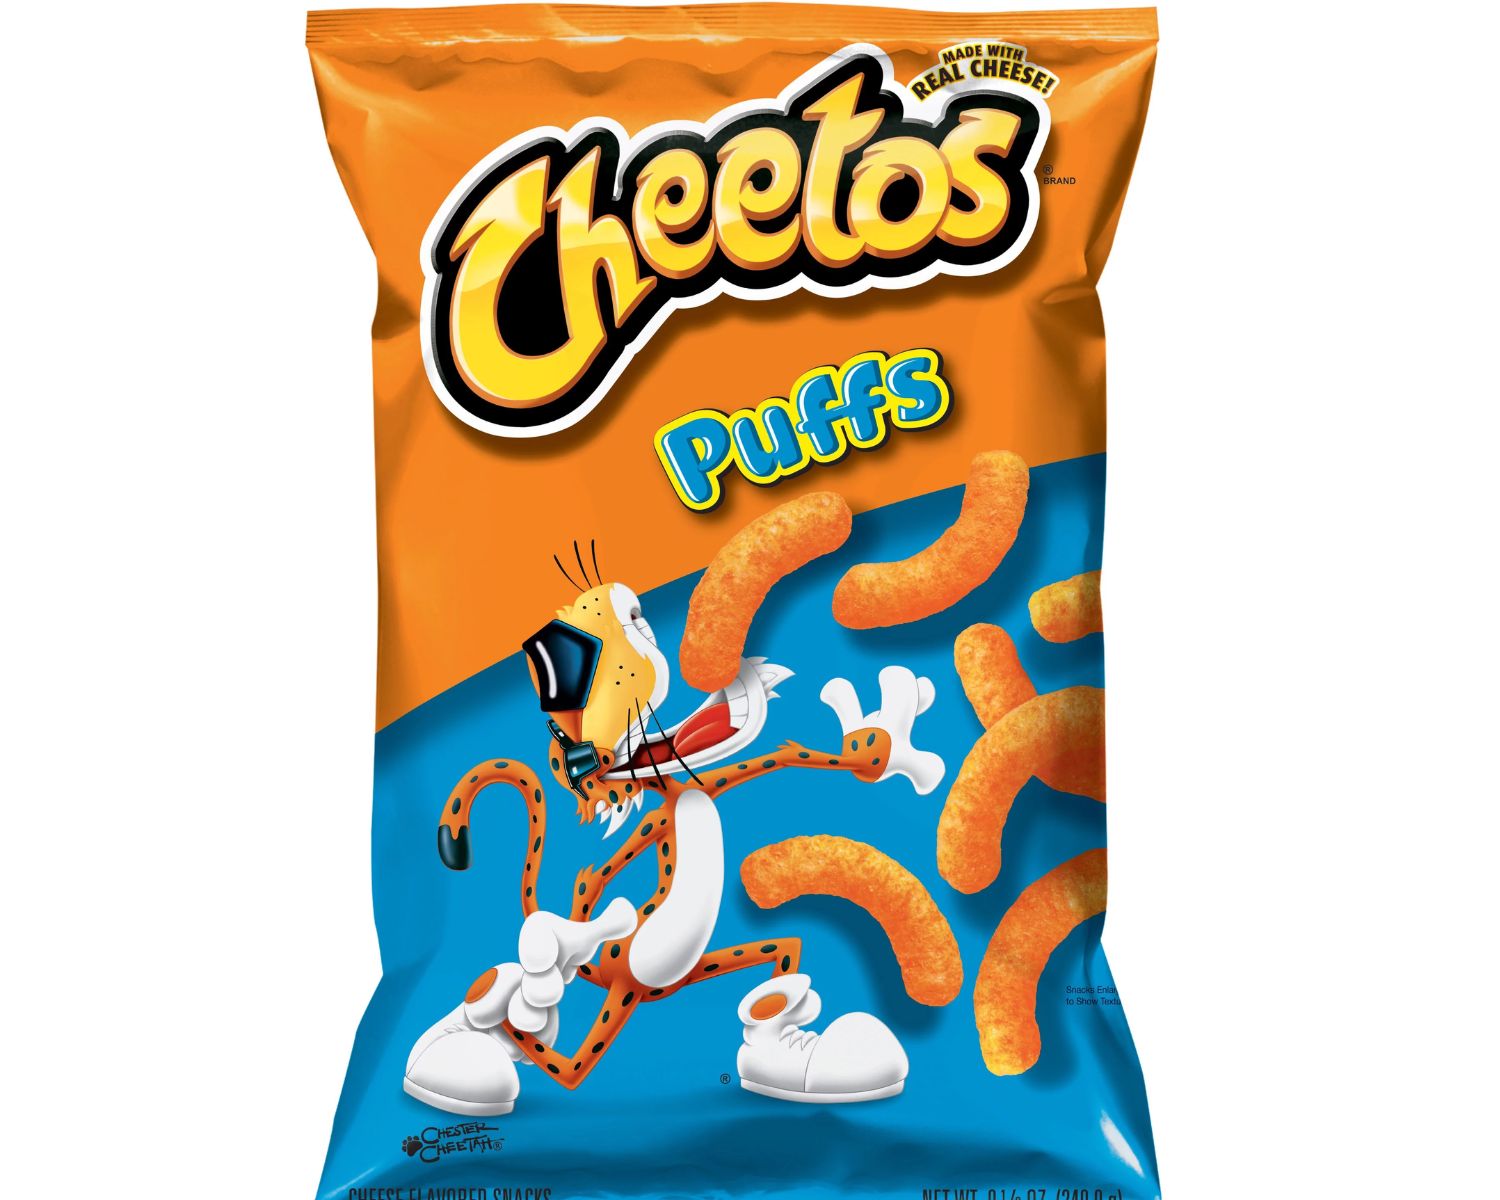 19-cheetos-cheese-puffs-nutrition-facts